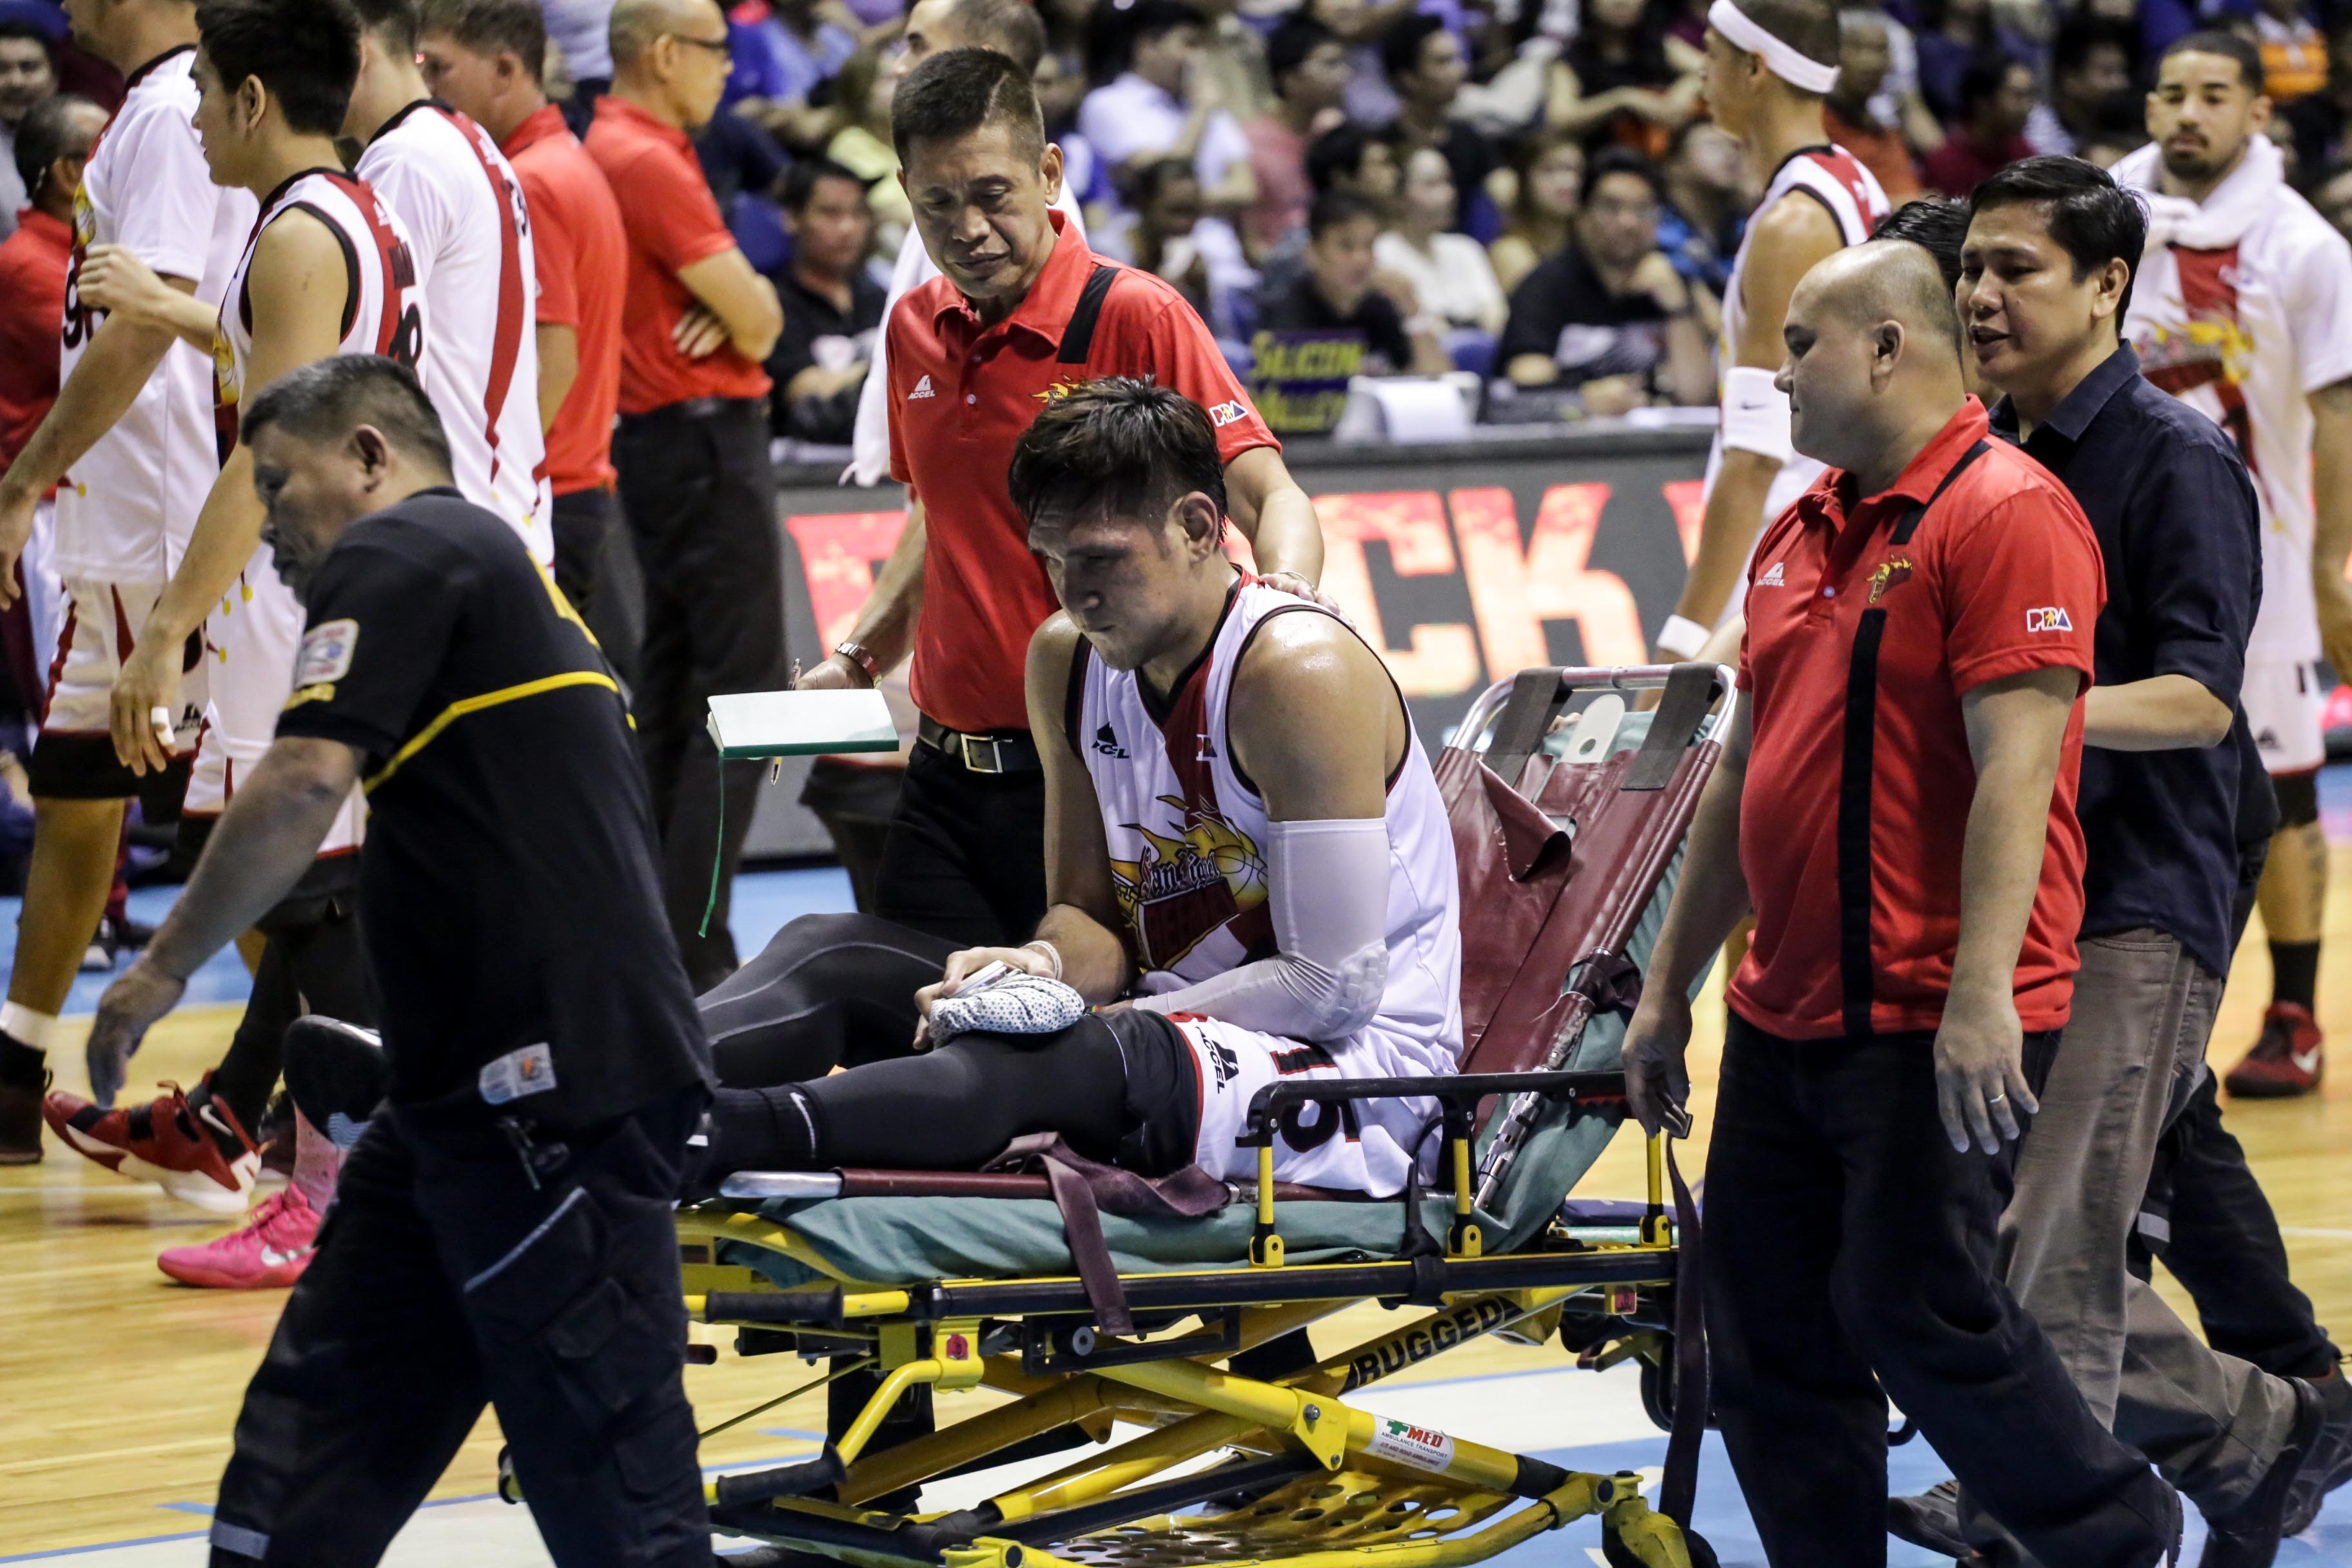 June Mar Fajardo in a stretcher after getting injured off an inbound play vs Jireh Ibañes. Photo by Tristan Tamayo/INQUIRER.net